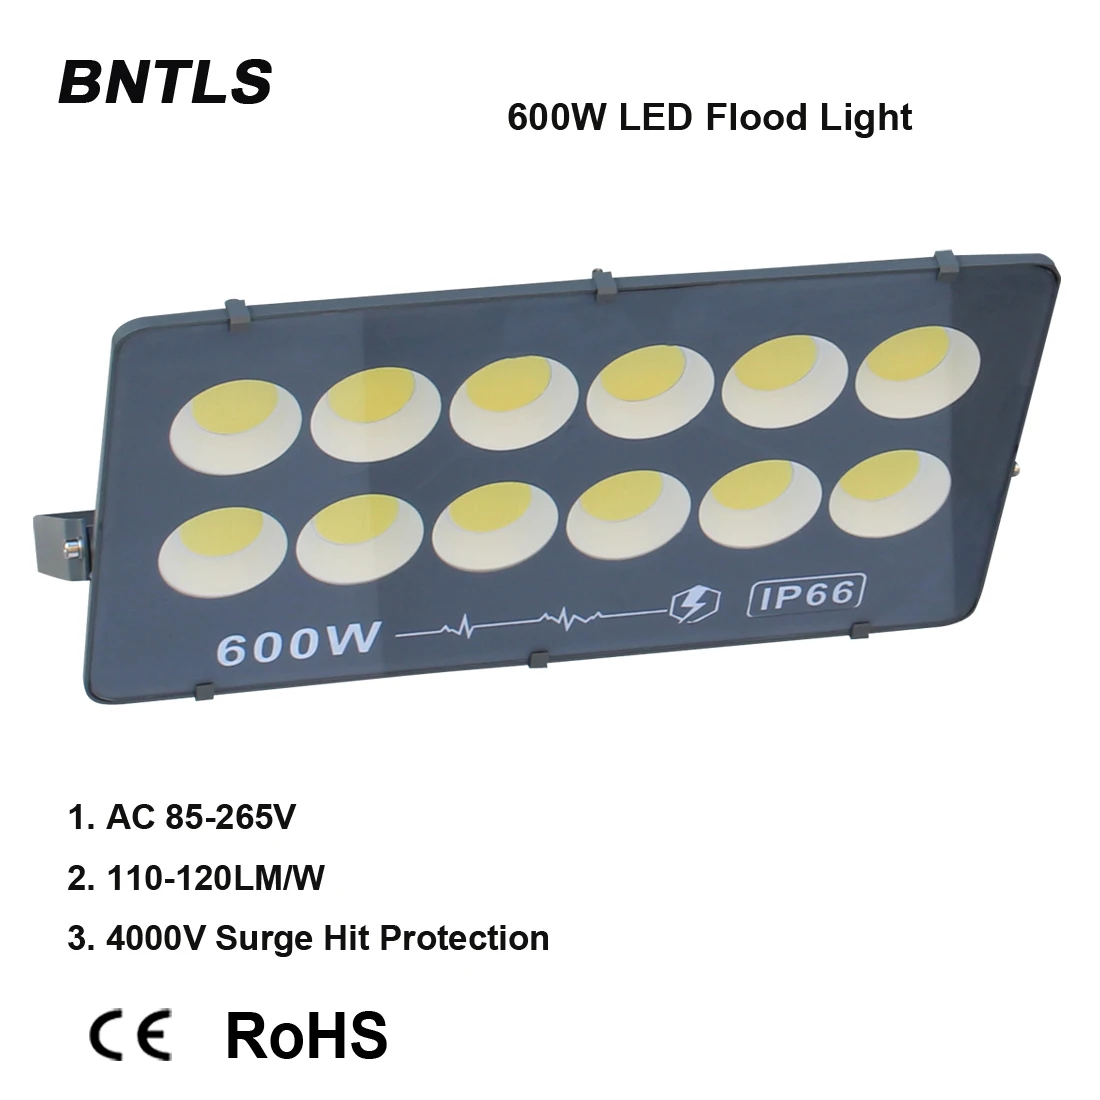 

LED Flood light 100W 200W 300W 400W 500W 600W Led high-power projection lamp, outdoor lighting, advertising light